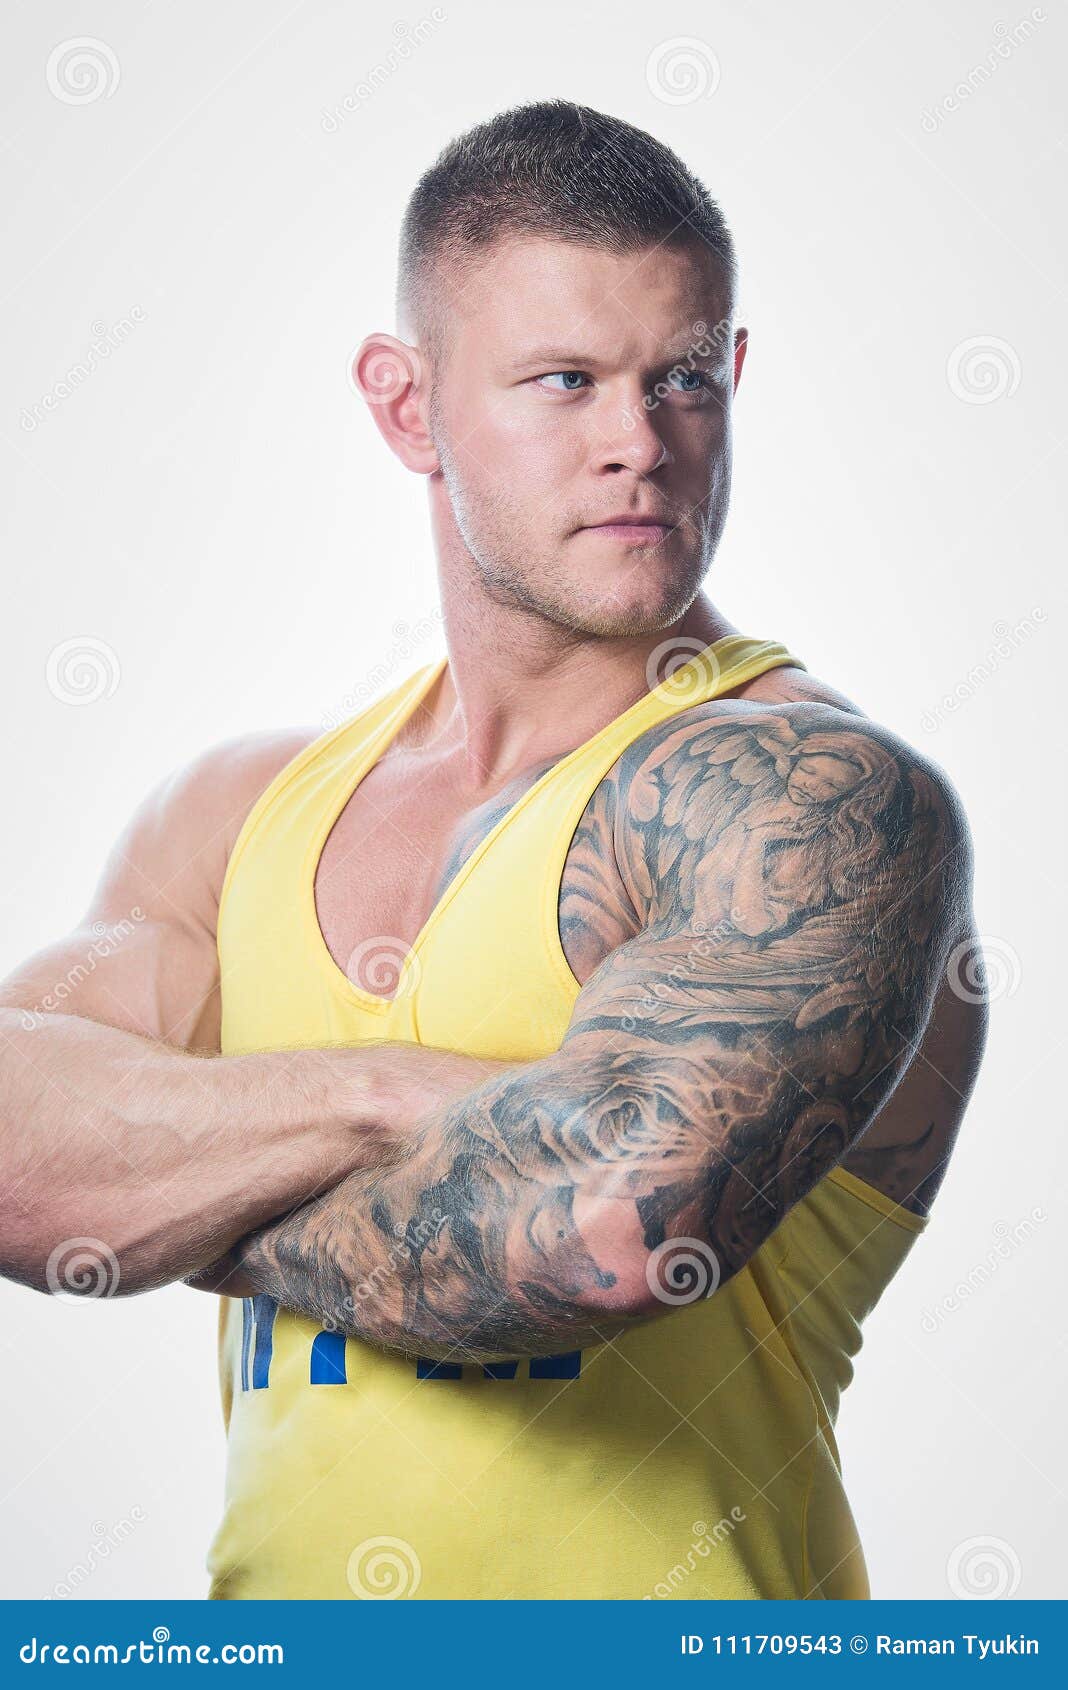 Muscular Man with Blue Eyes and Tattoo in the Yellow Tank Top